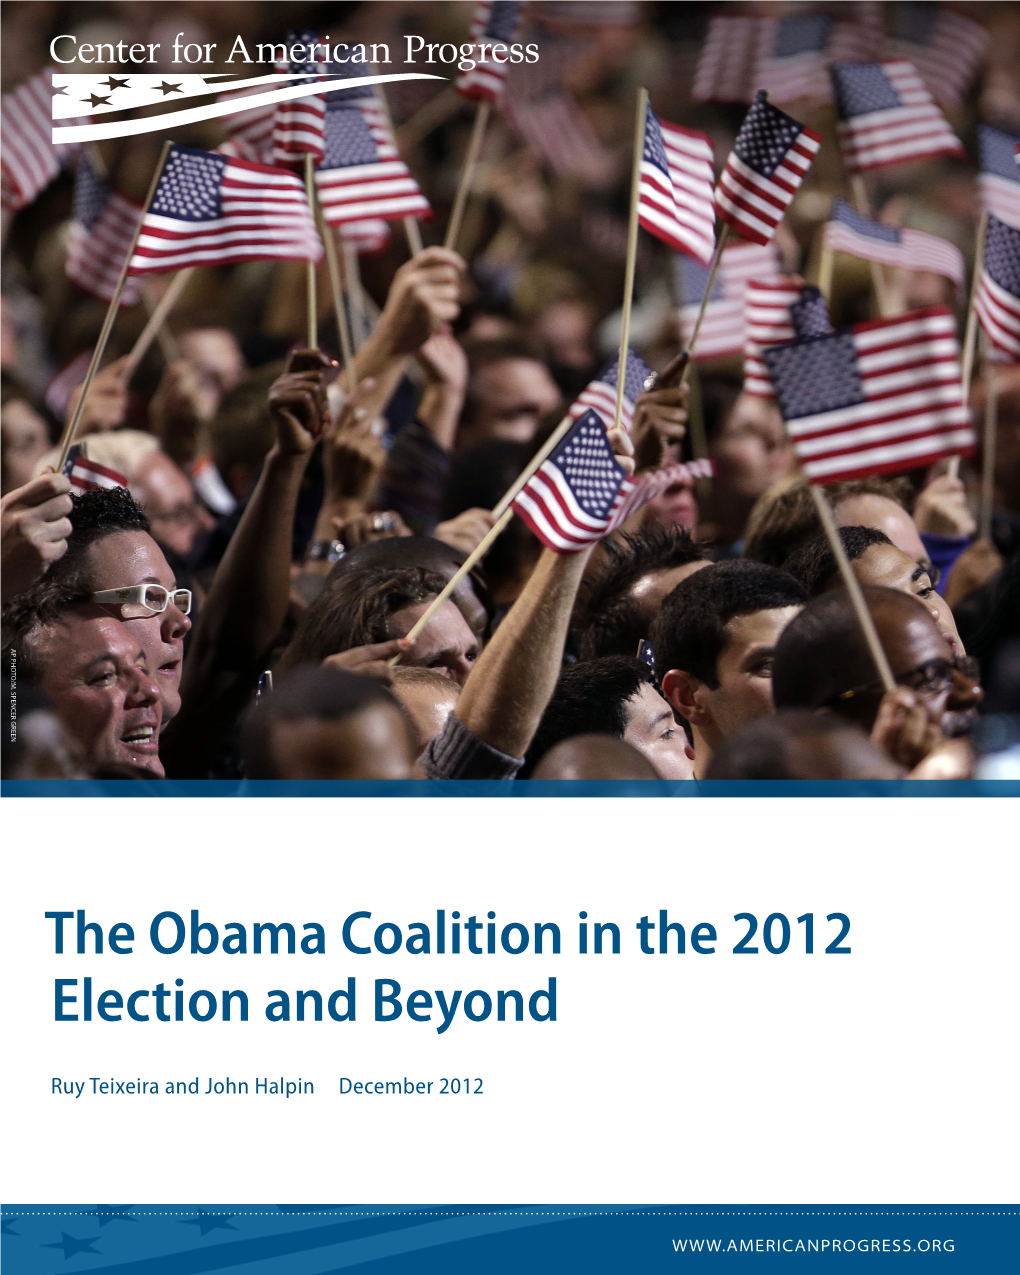 The Obama Coalition in the 2012 Election and Beyond